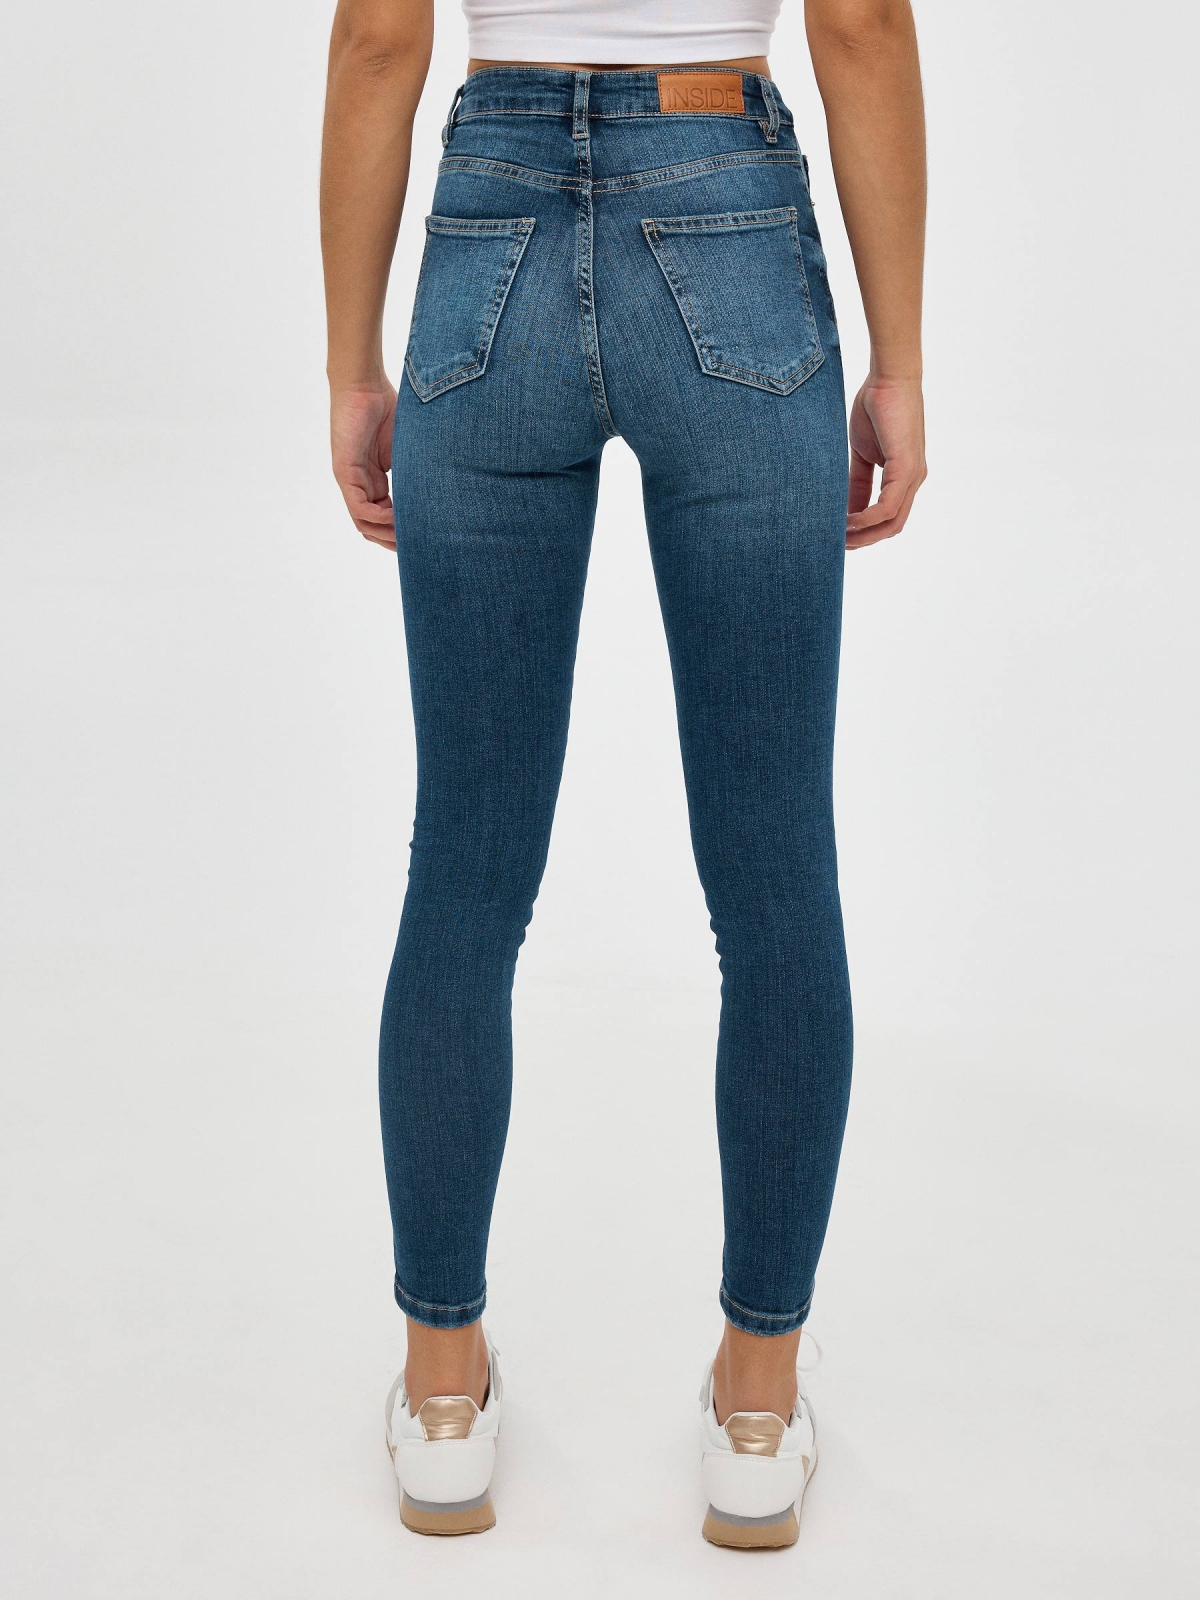 High rise skinny jeans blue middle back view